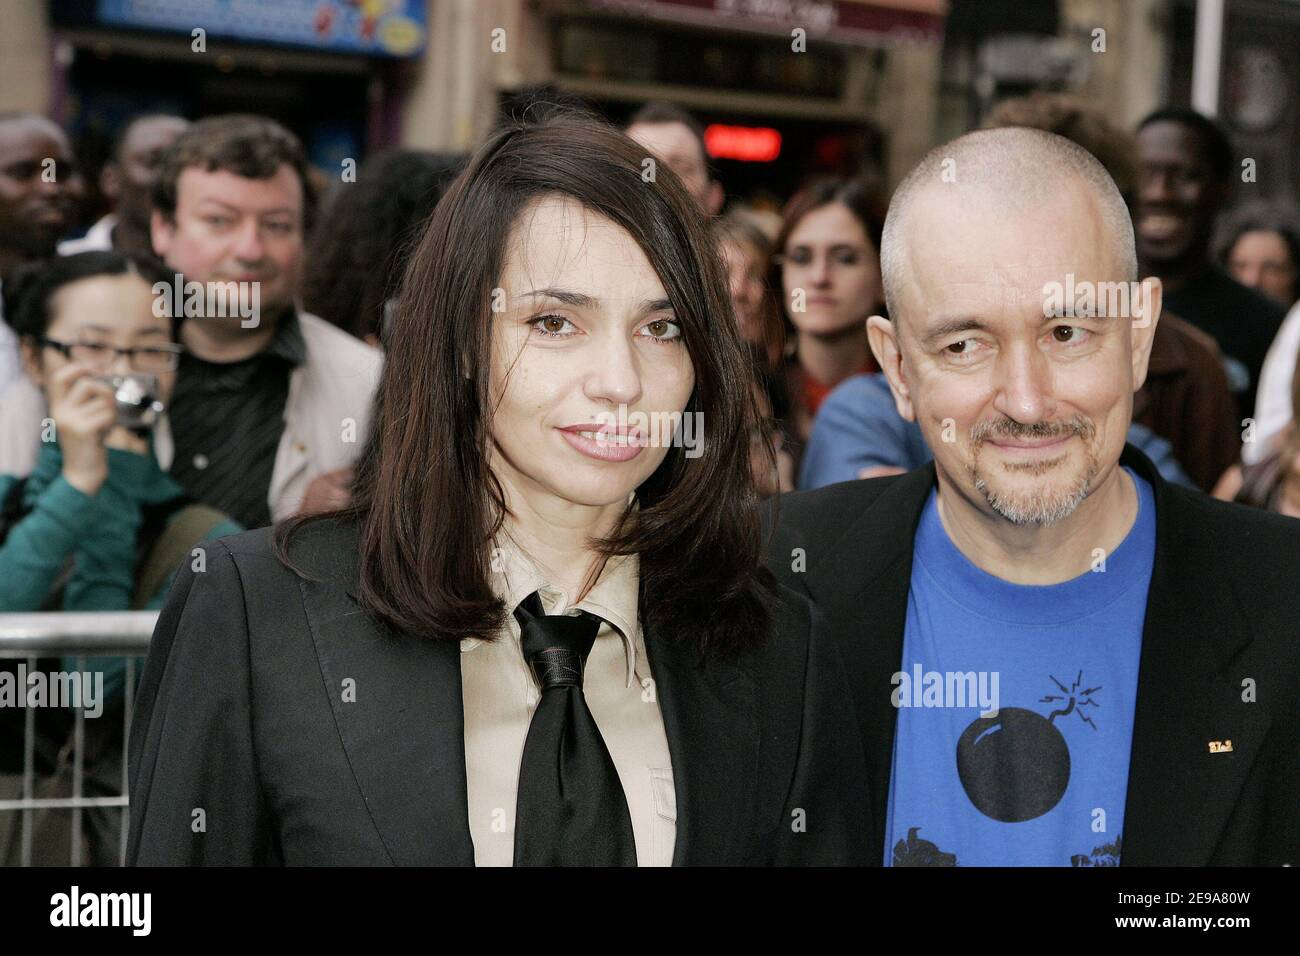 French director jean-Jacques Beineix and French actress Beatrice Dalle  attend the 'Jean-Jacques Beineix's Masterclass' at 'Grand Rex' theater in  Paris, France on May 12, 2006. Photo by Laurent Zabulon/ABACAPRESS.COM  Stock Photo -